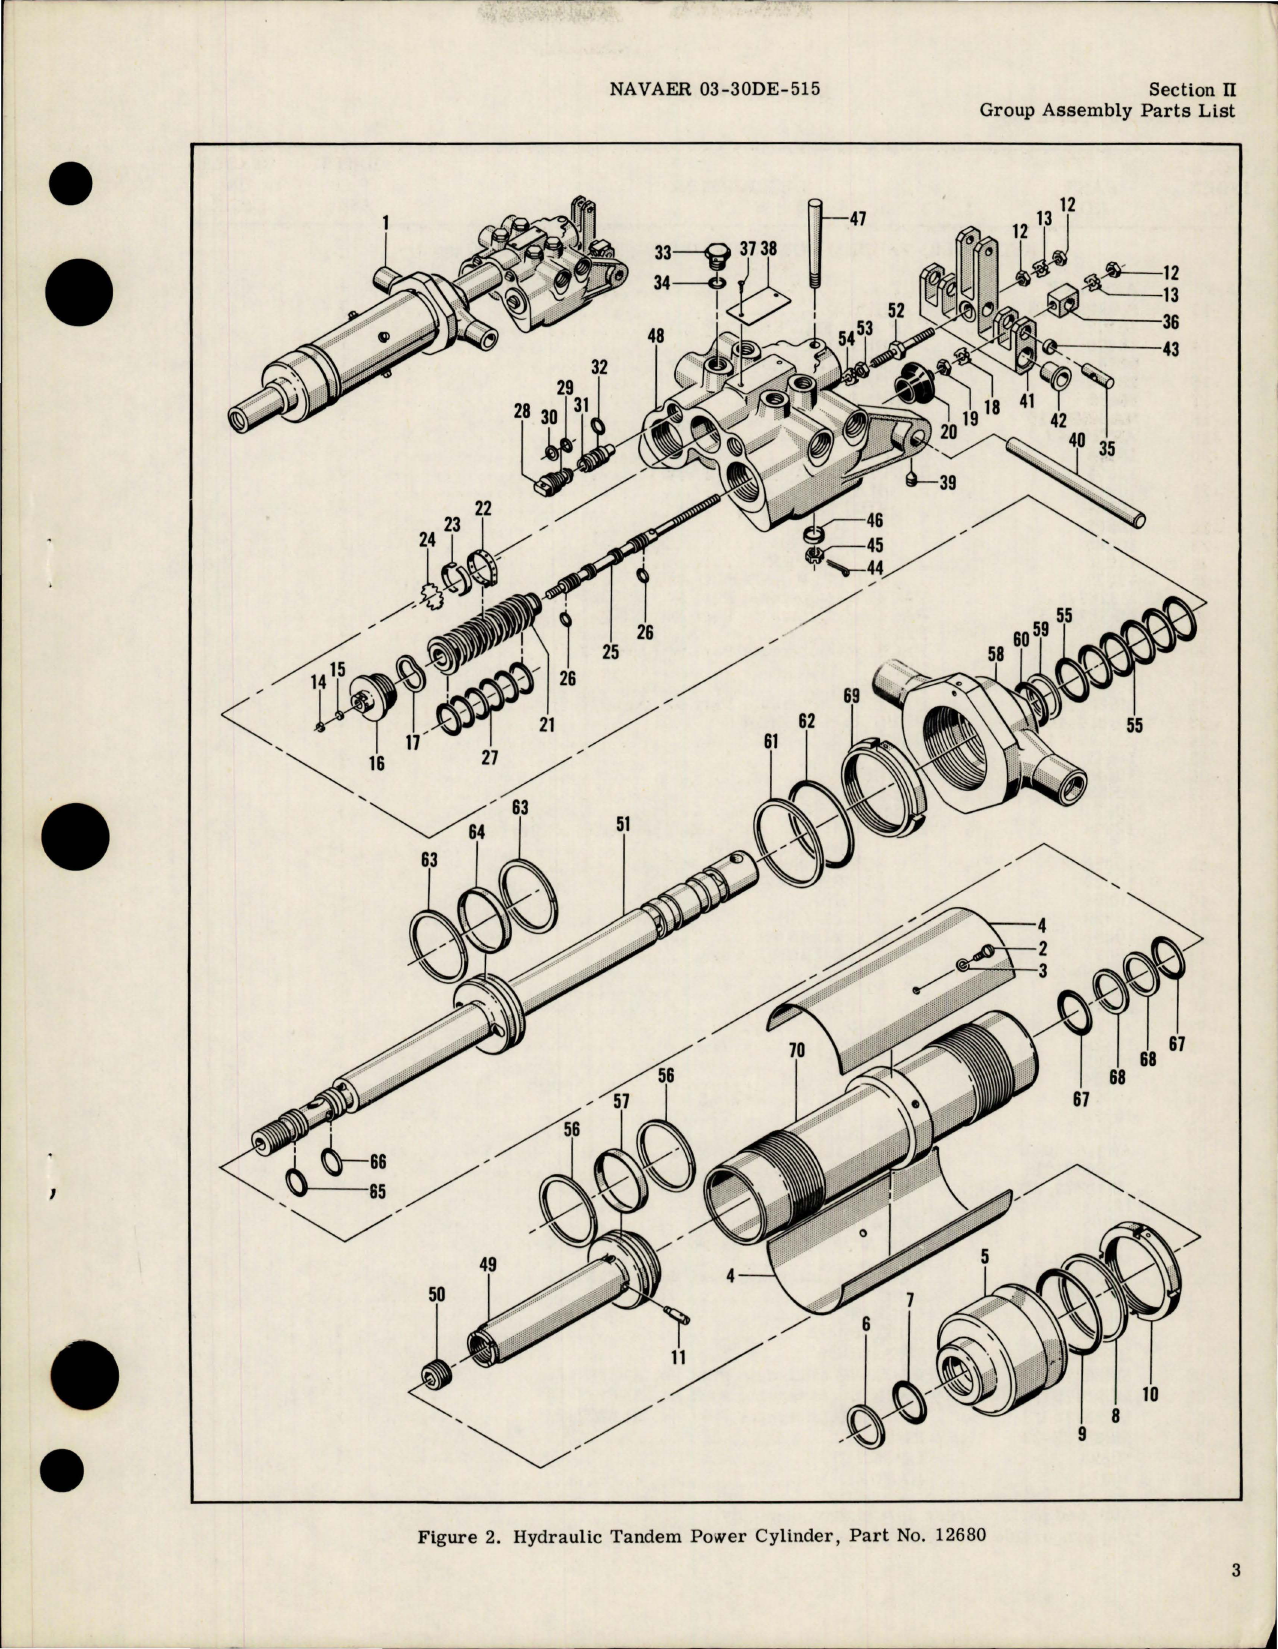 Sample page 5 from AirCorps Library document: Illustrated Parts Breakdown for Hydraulic Tandem Power Cylinder - Part 12680 